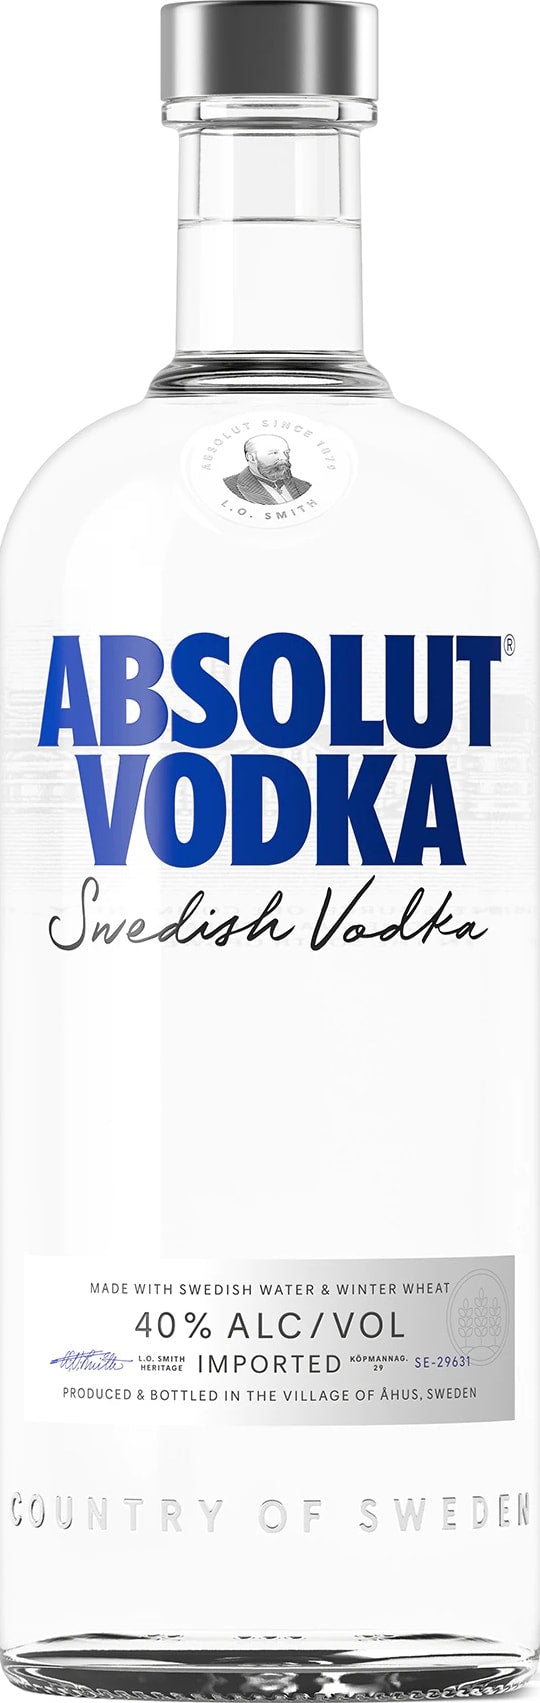 Absolut Vodka Blue 70cl NV - Buy Absolut Vodka Wines from GREAT WINES DIRECT wine shop